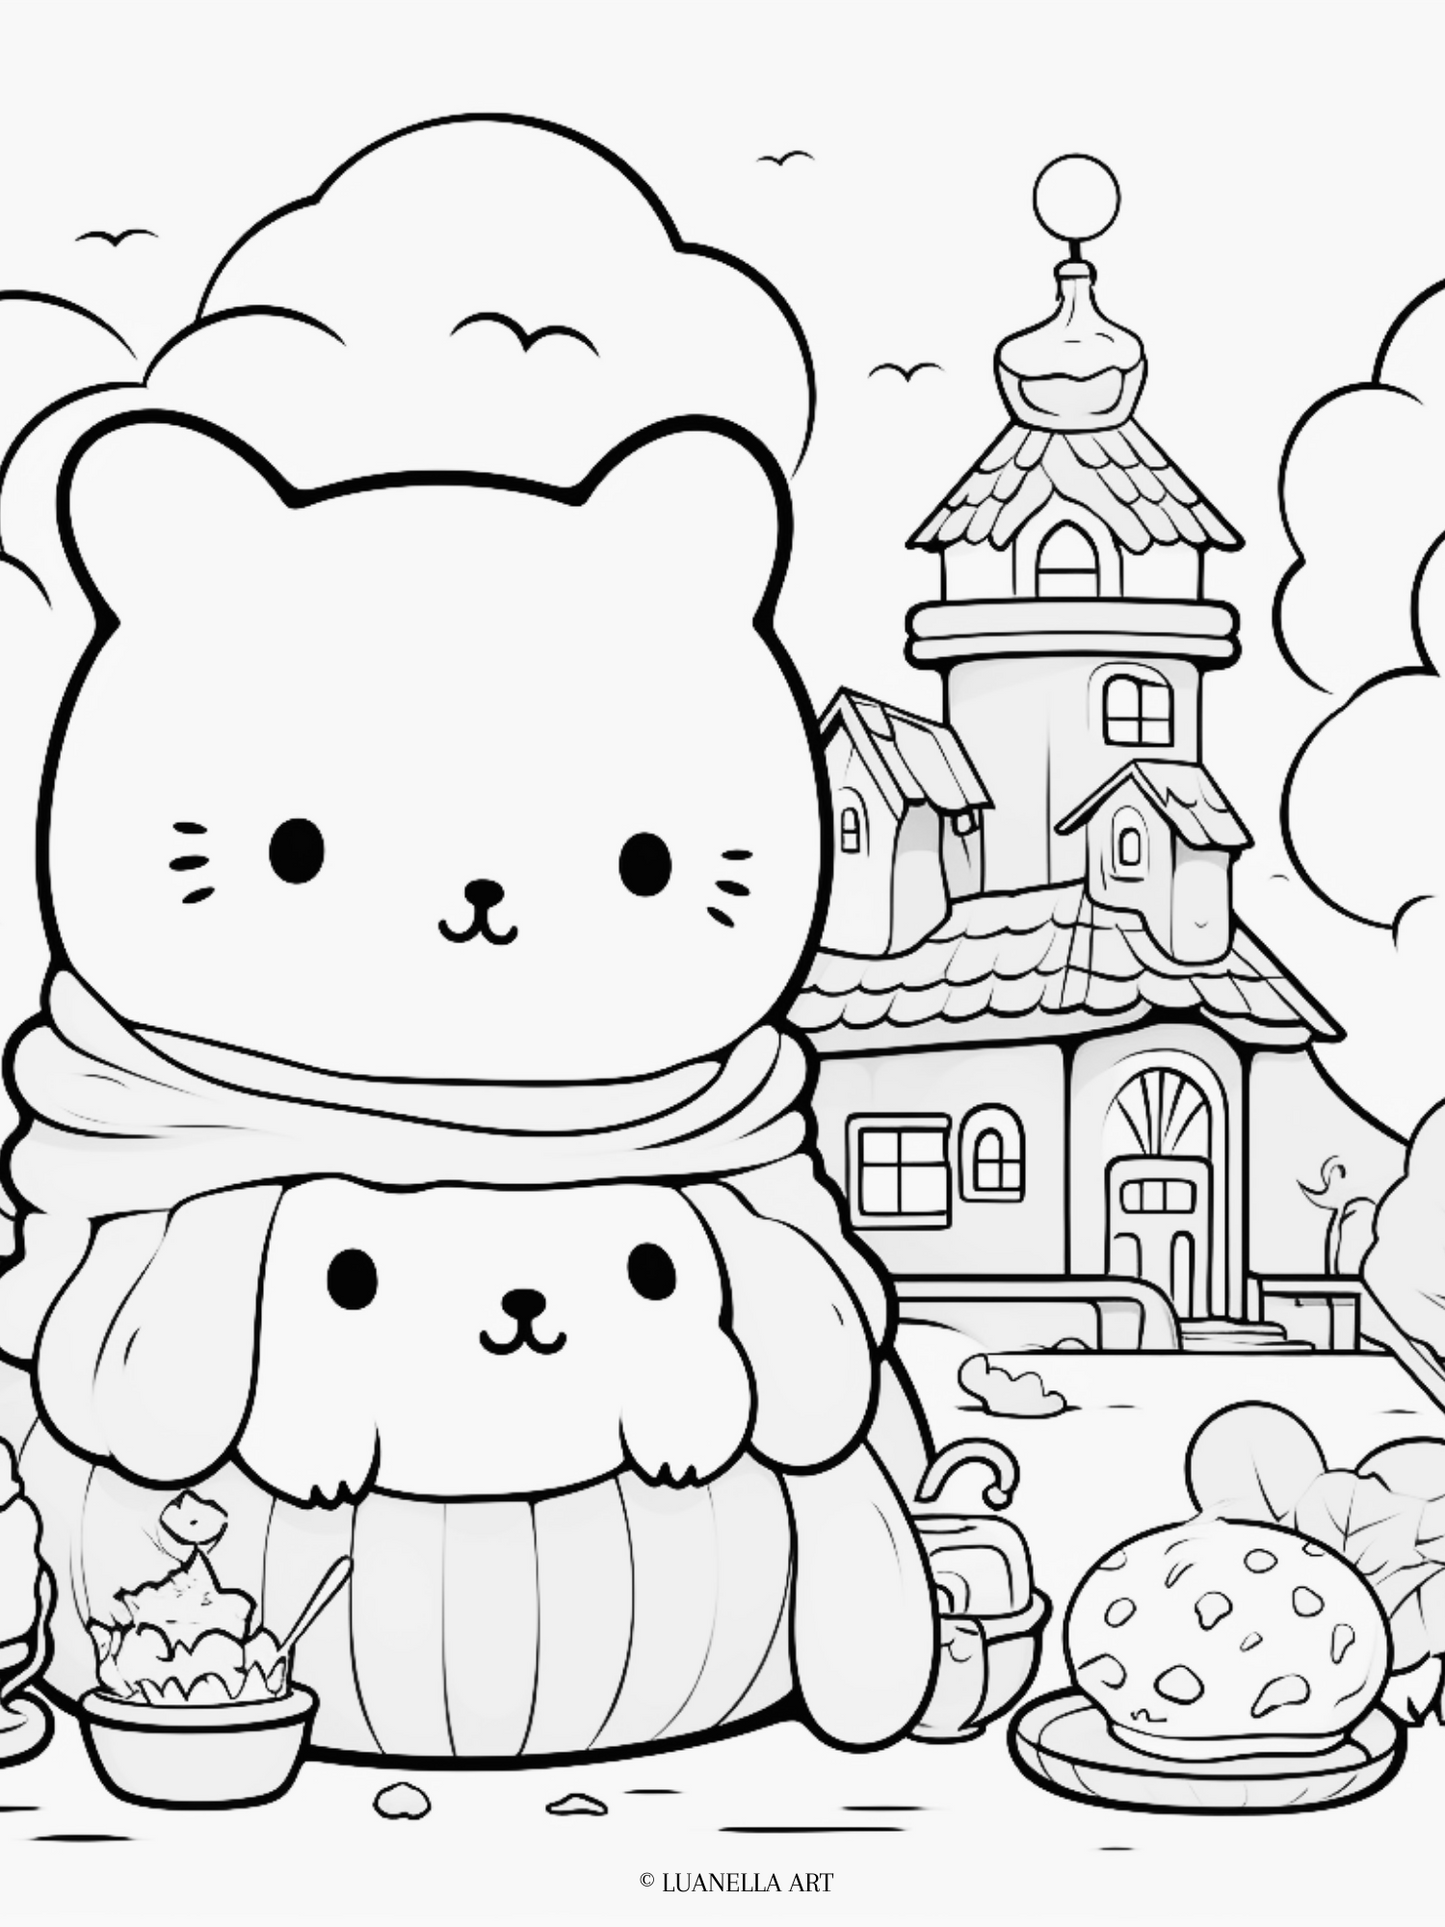 Squishmallow picnic with cottage in background | Coloring Page | Instant Digital Download